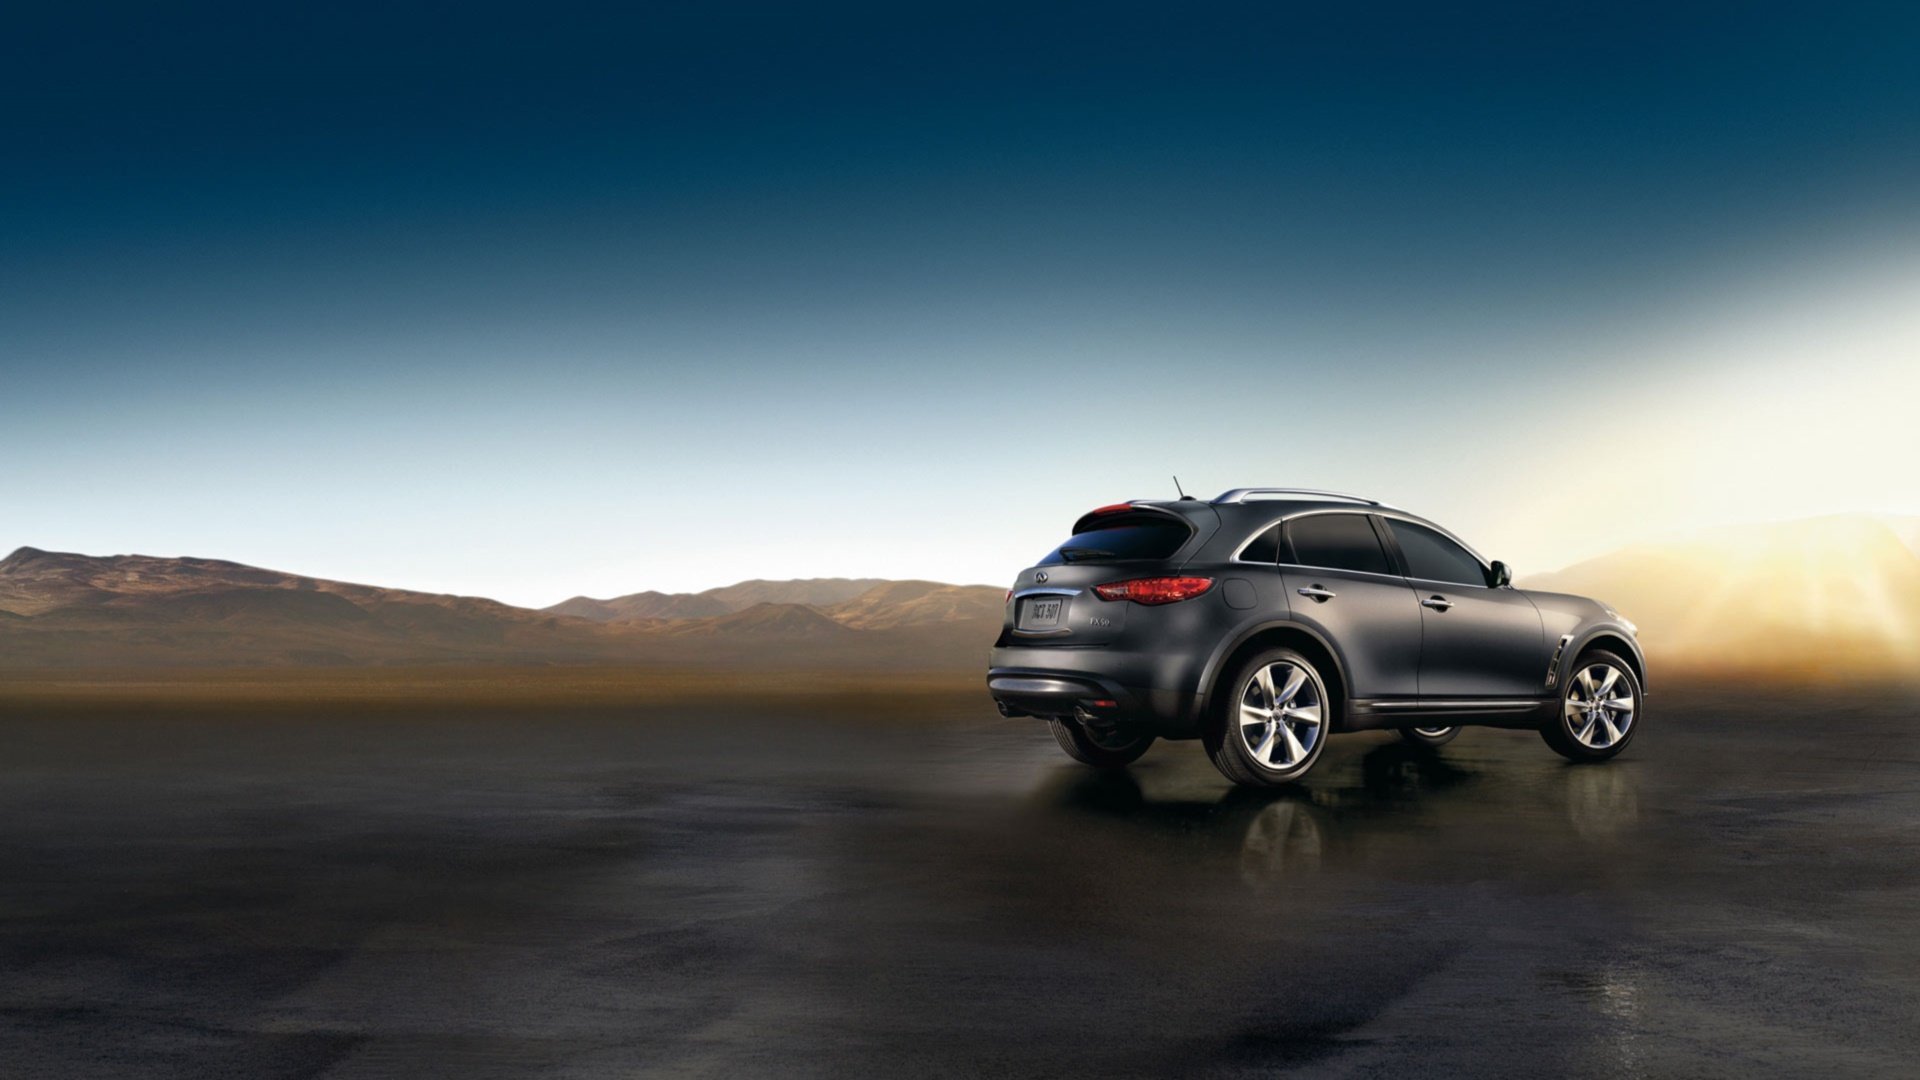 Awesome Infiniti QX70 free wallpaper ID:77827 for full hd 1920x1080 computer